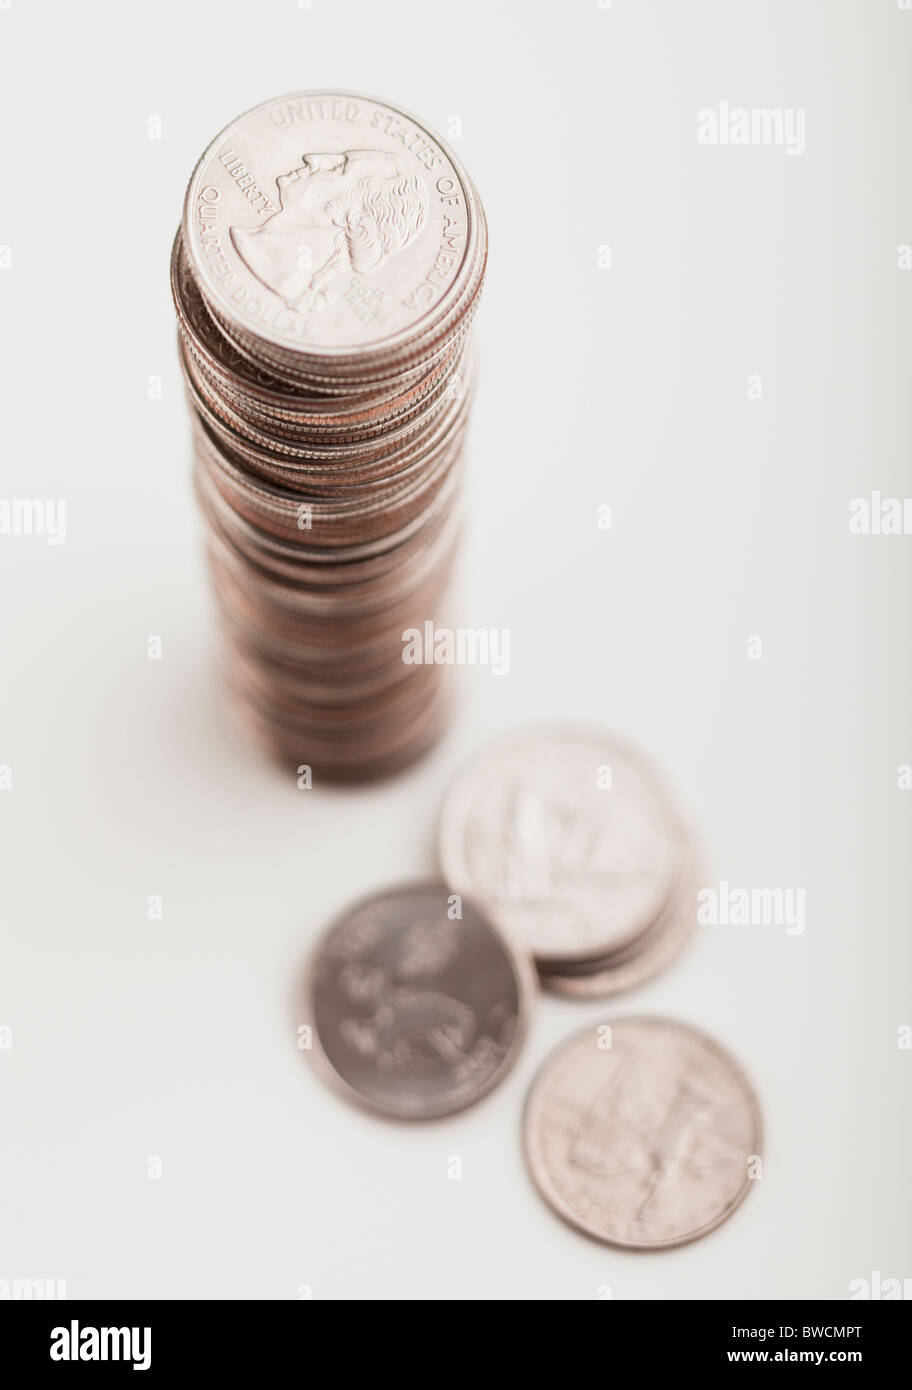 Old Pennies Coin Collection Series Stock Photo - Download Image Now -  Numismatics, US Penny, Arranging - iStock